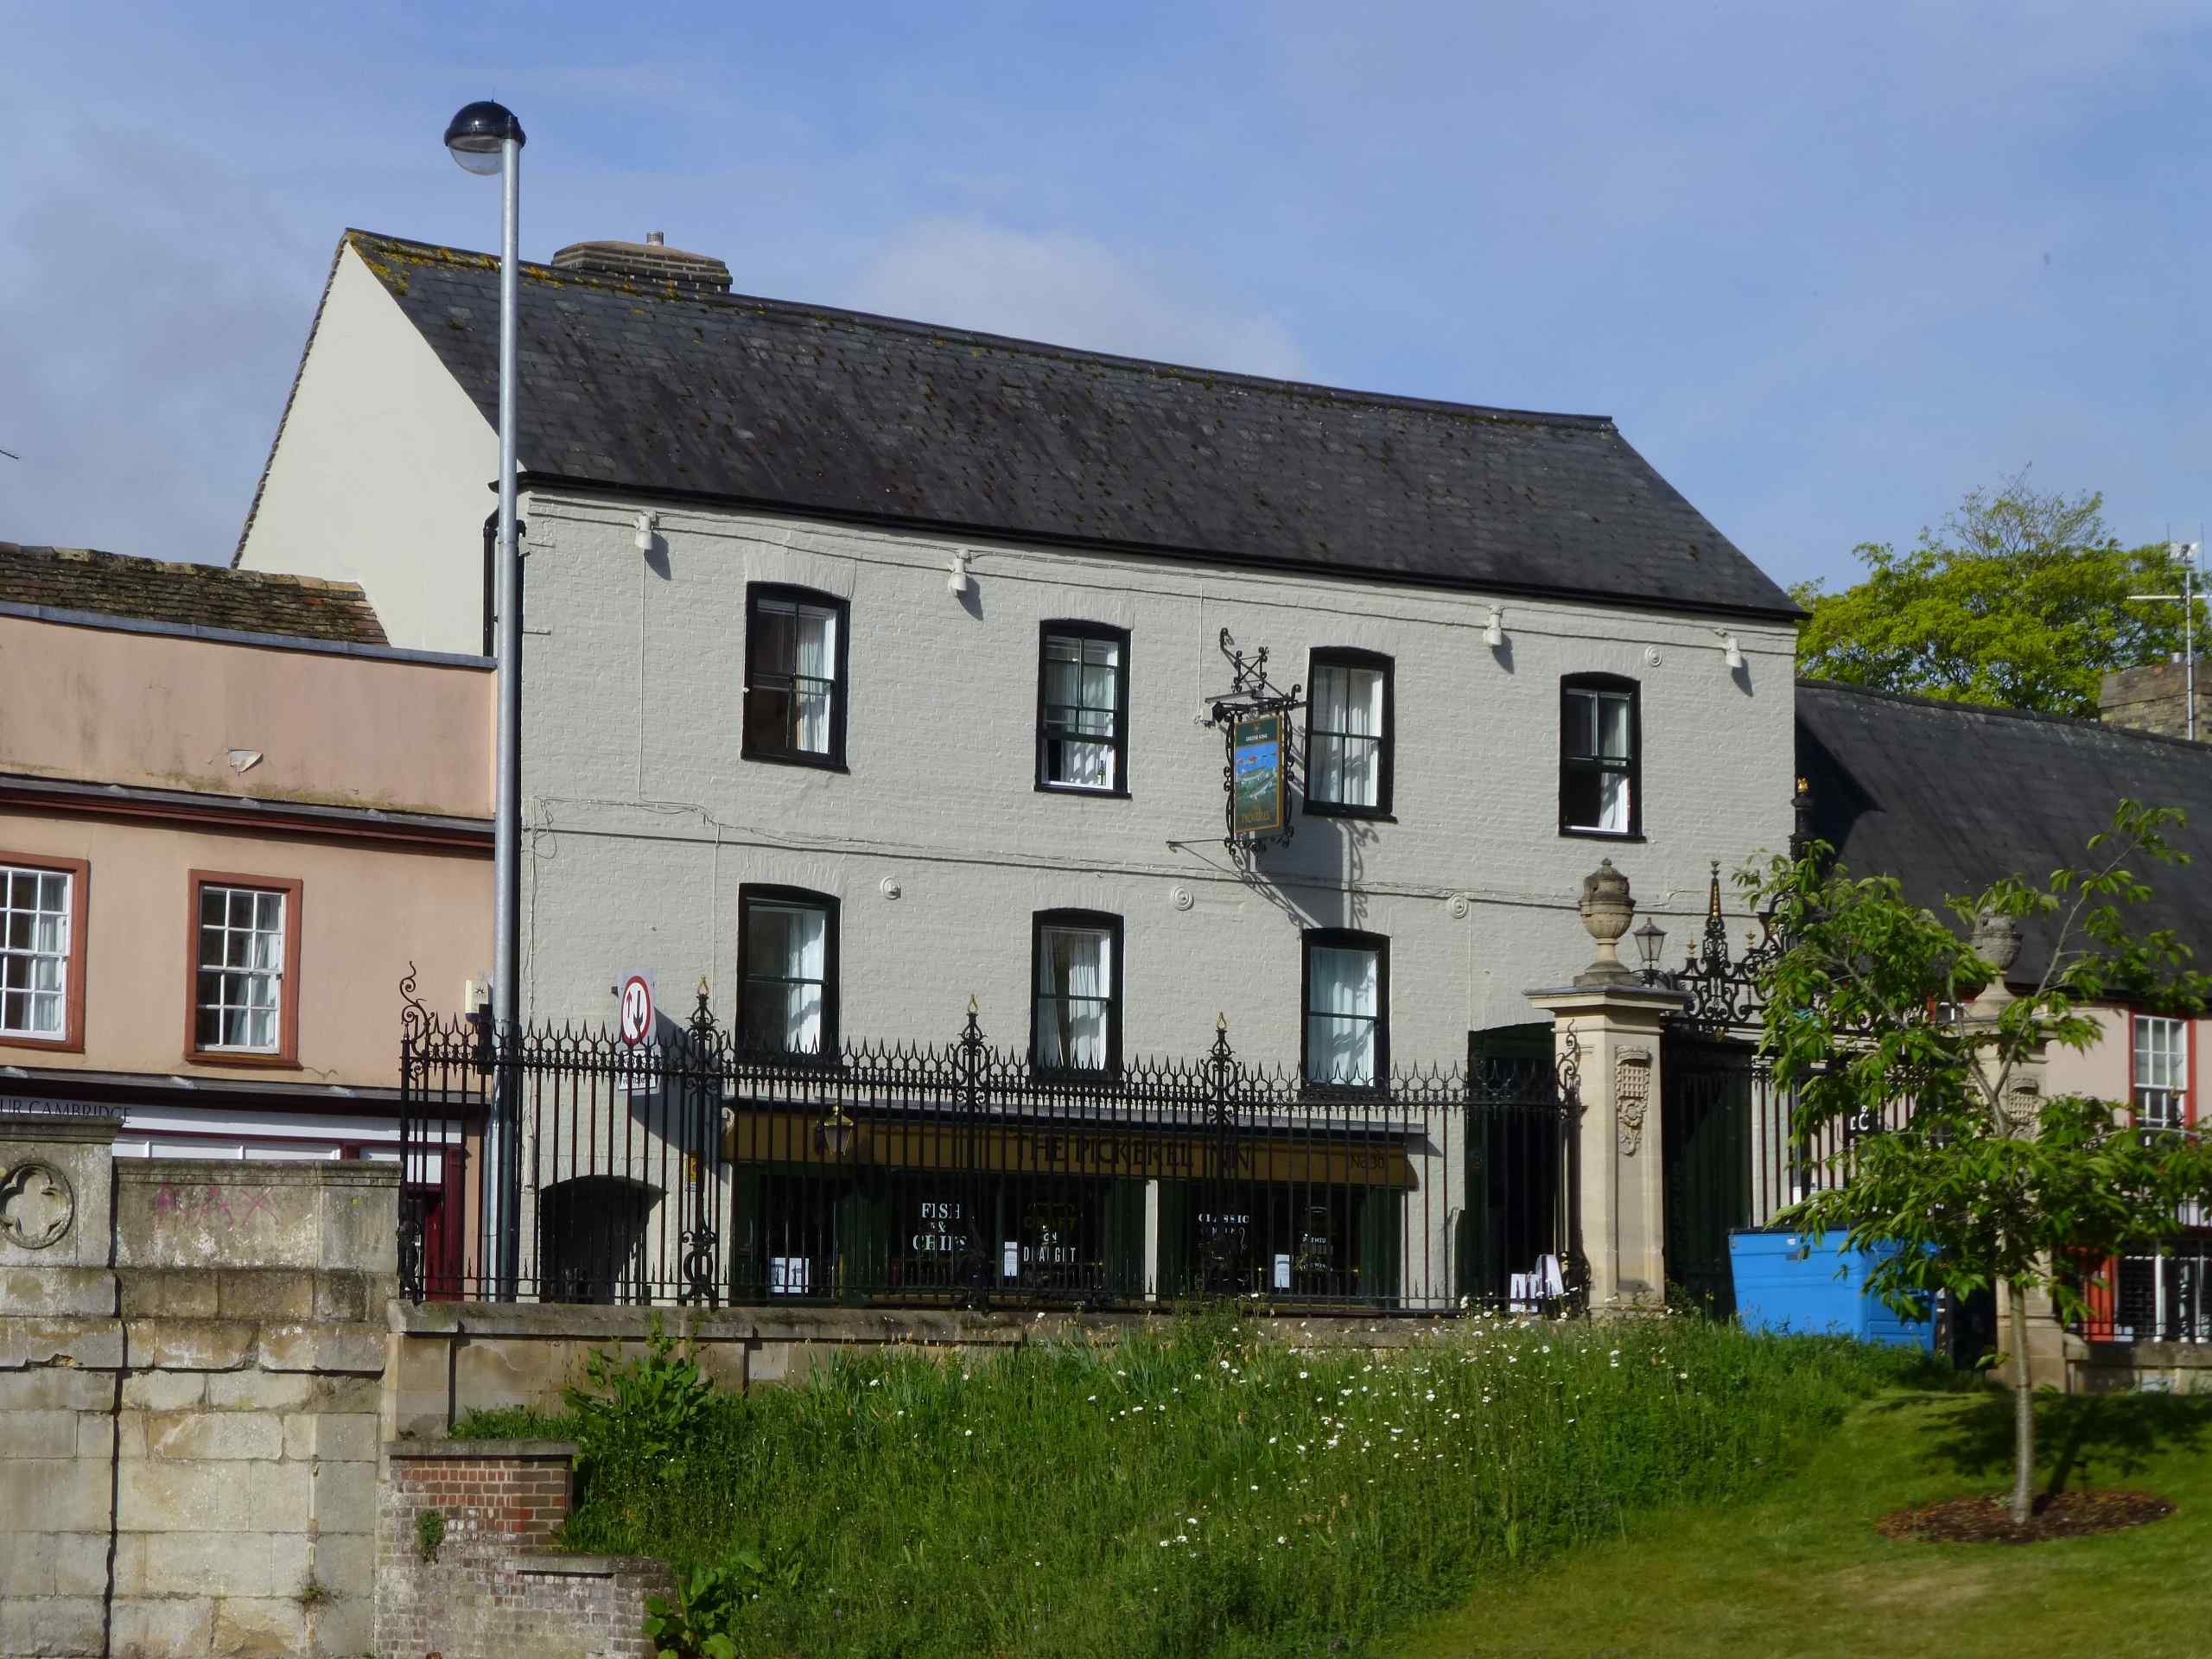 Wide shot of the exterior of the Pickerel Inn in Cambridge, UK. A stone wall, black iron fence and grass bank are in the lower half of the image between the building and the photographer.